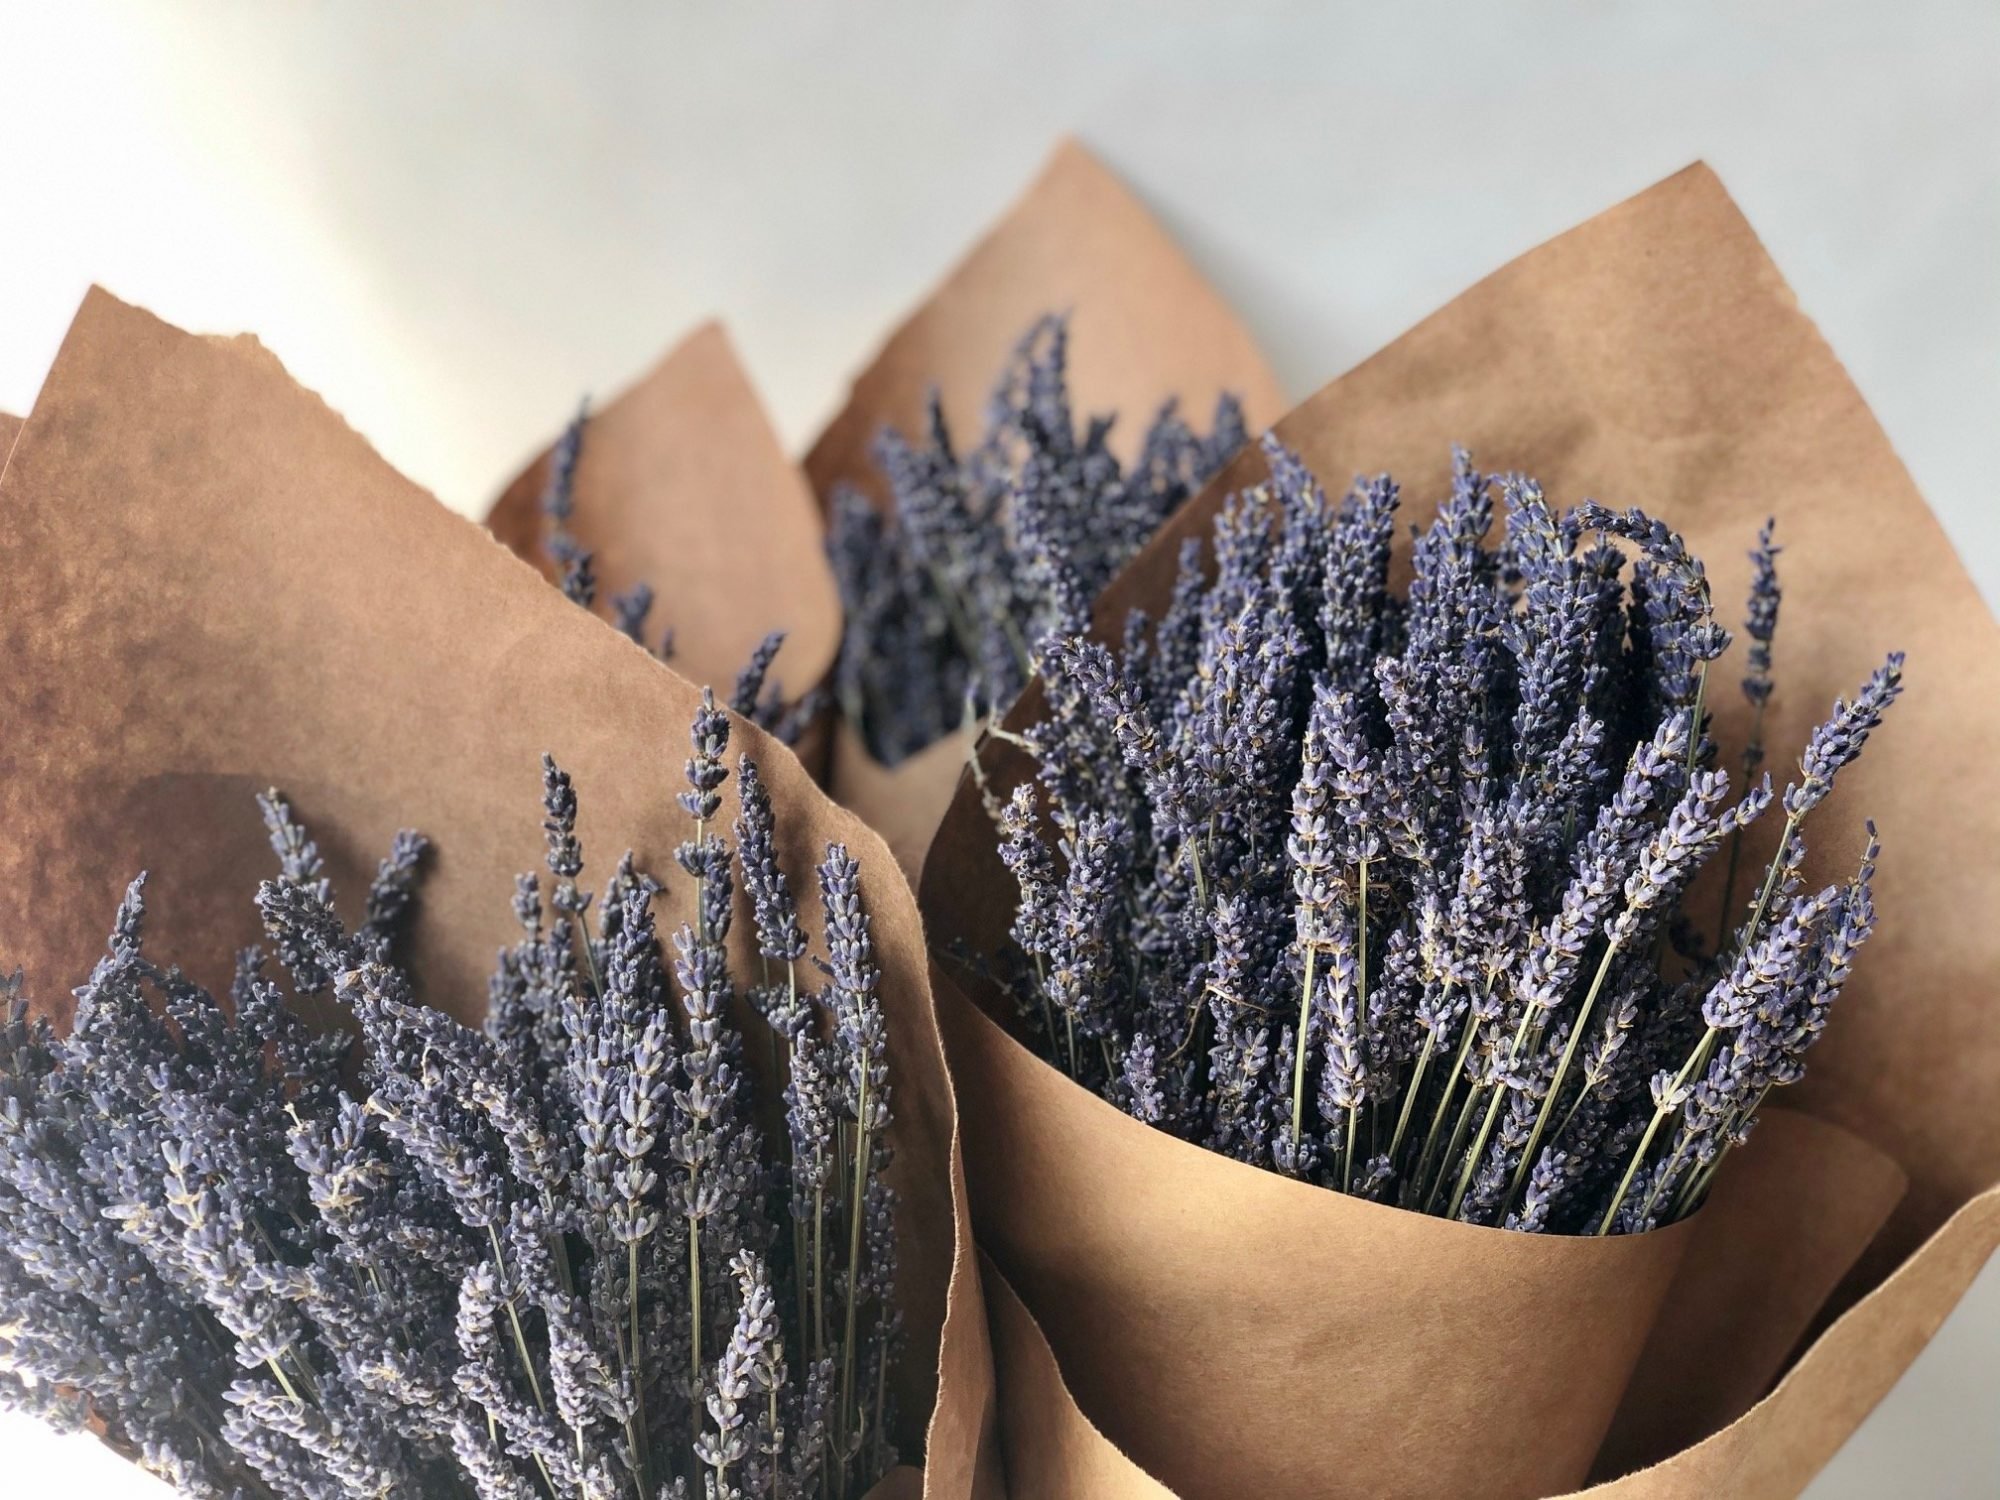 Dried Lavender Bunch — Sungrove Blossoms - Rochester, NY Florist